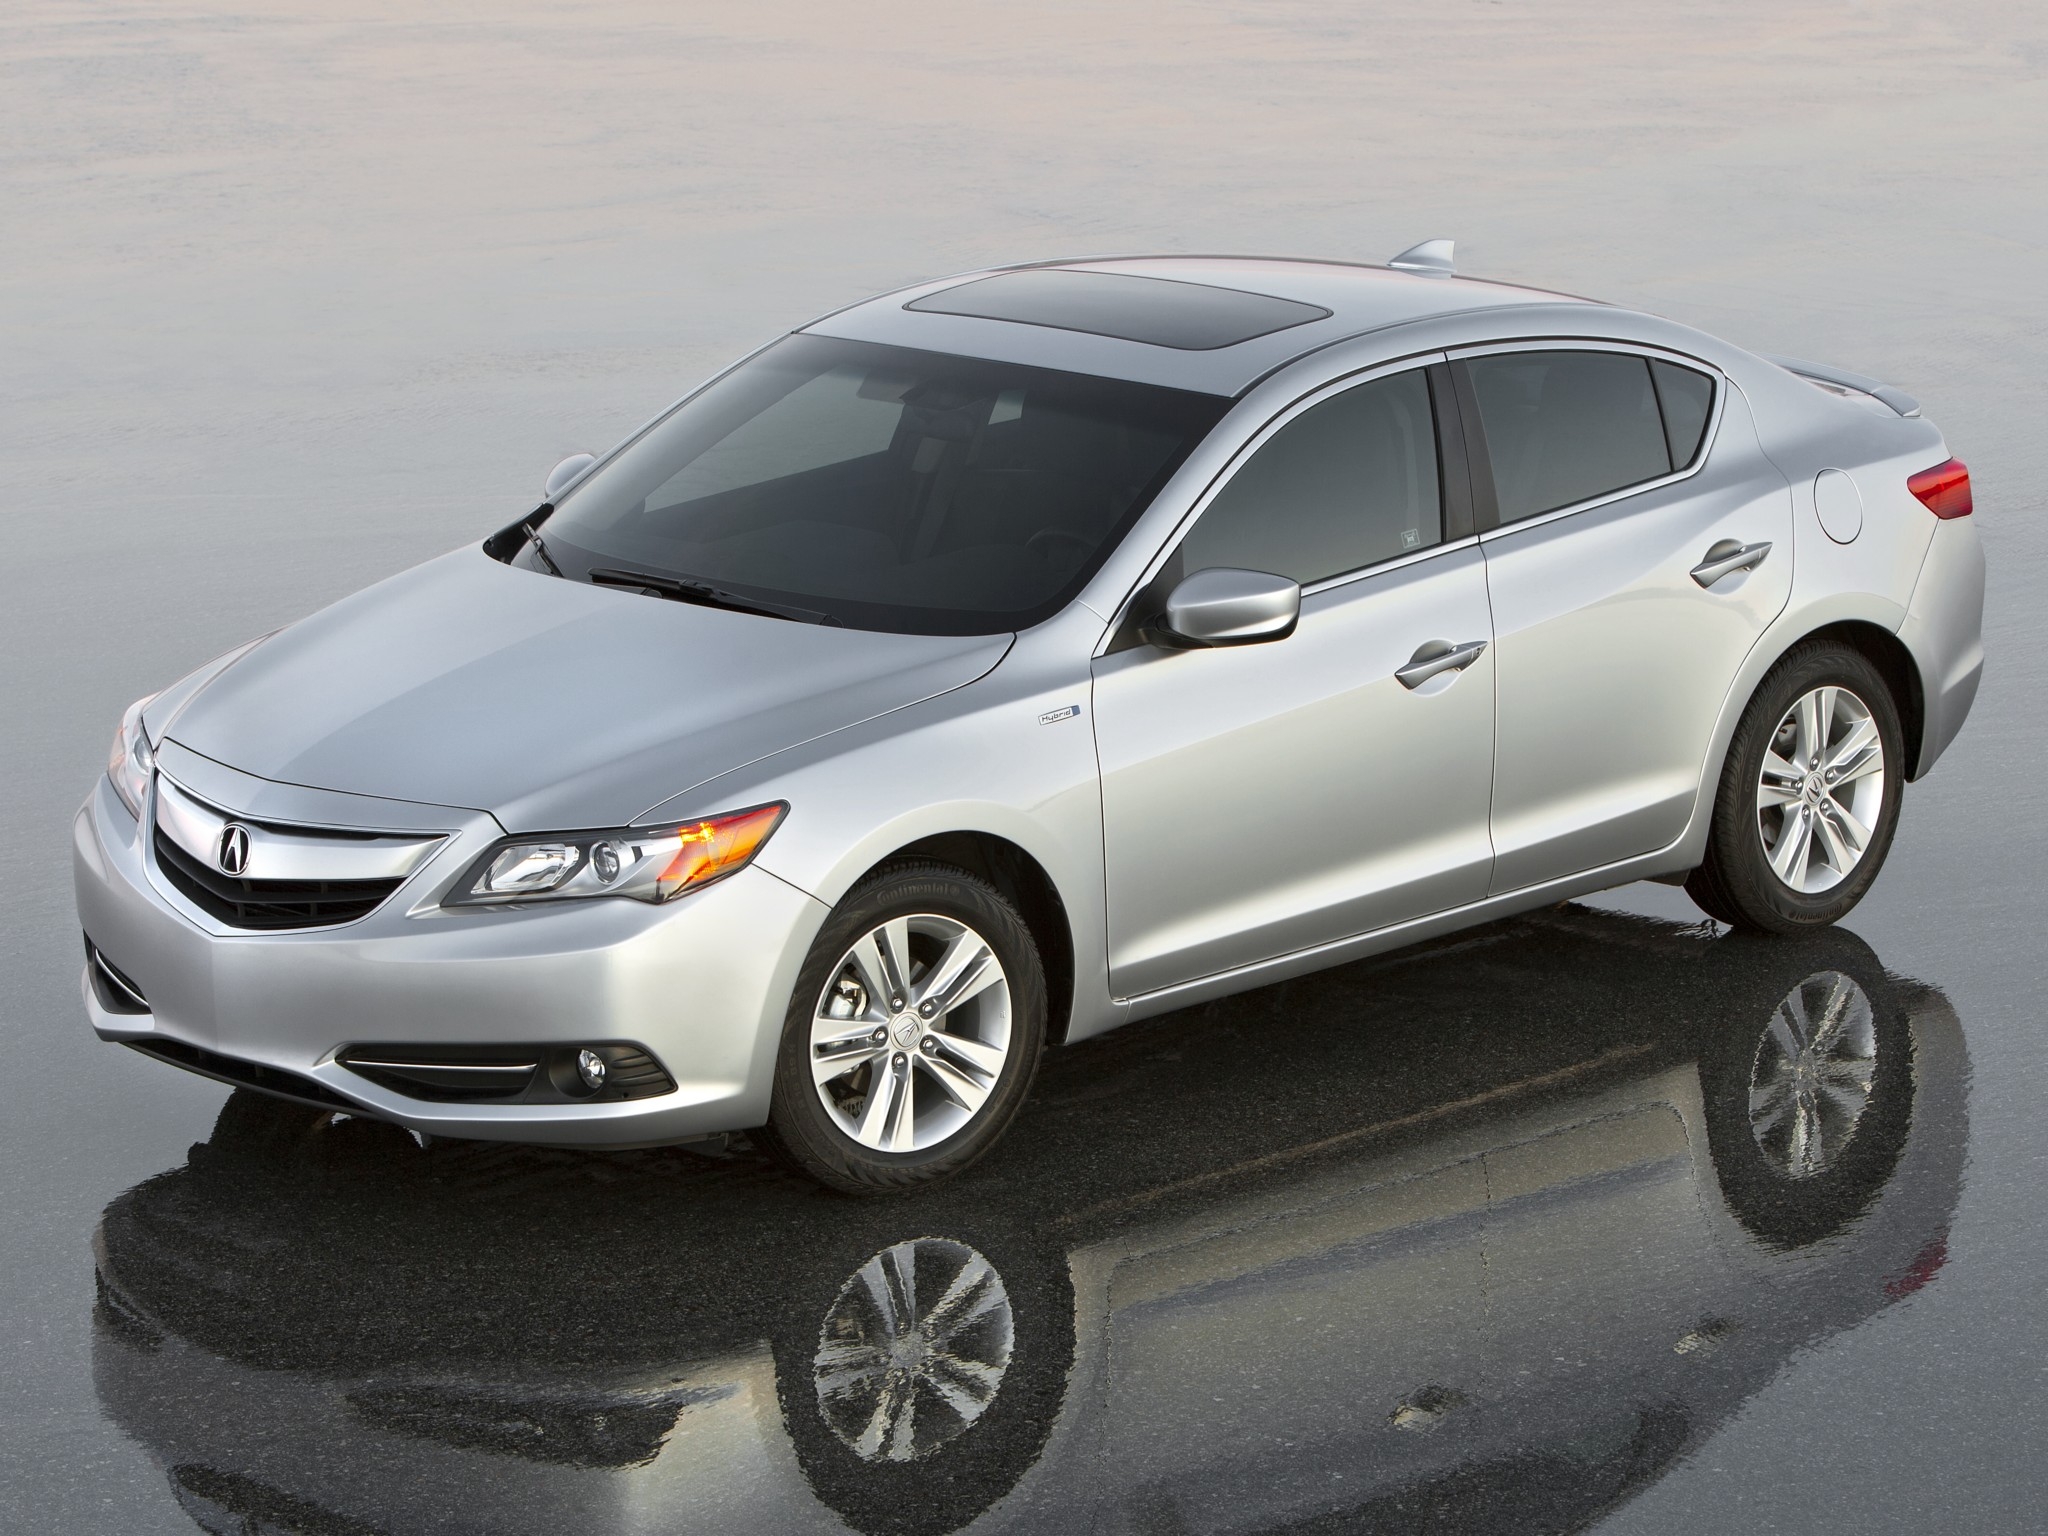 android auto, acura, cars, view from above, reflection, style, ilx, hybrid, silver, sedan